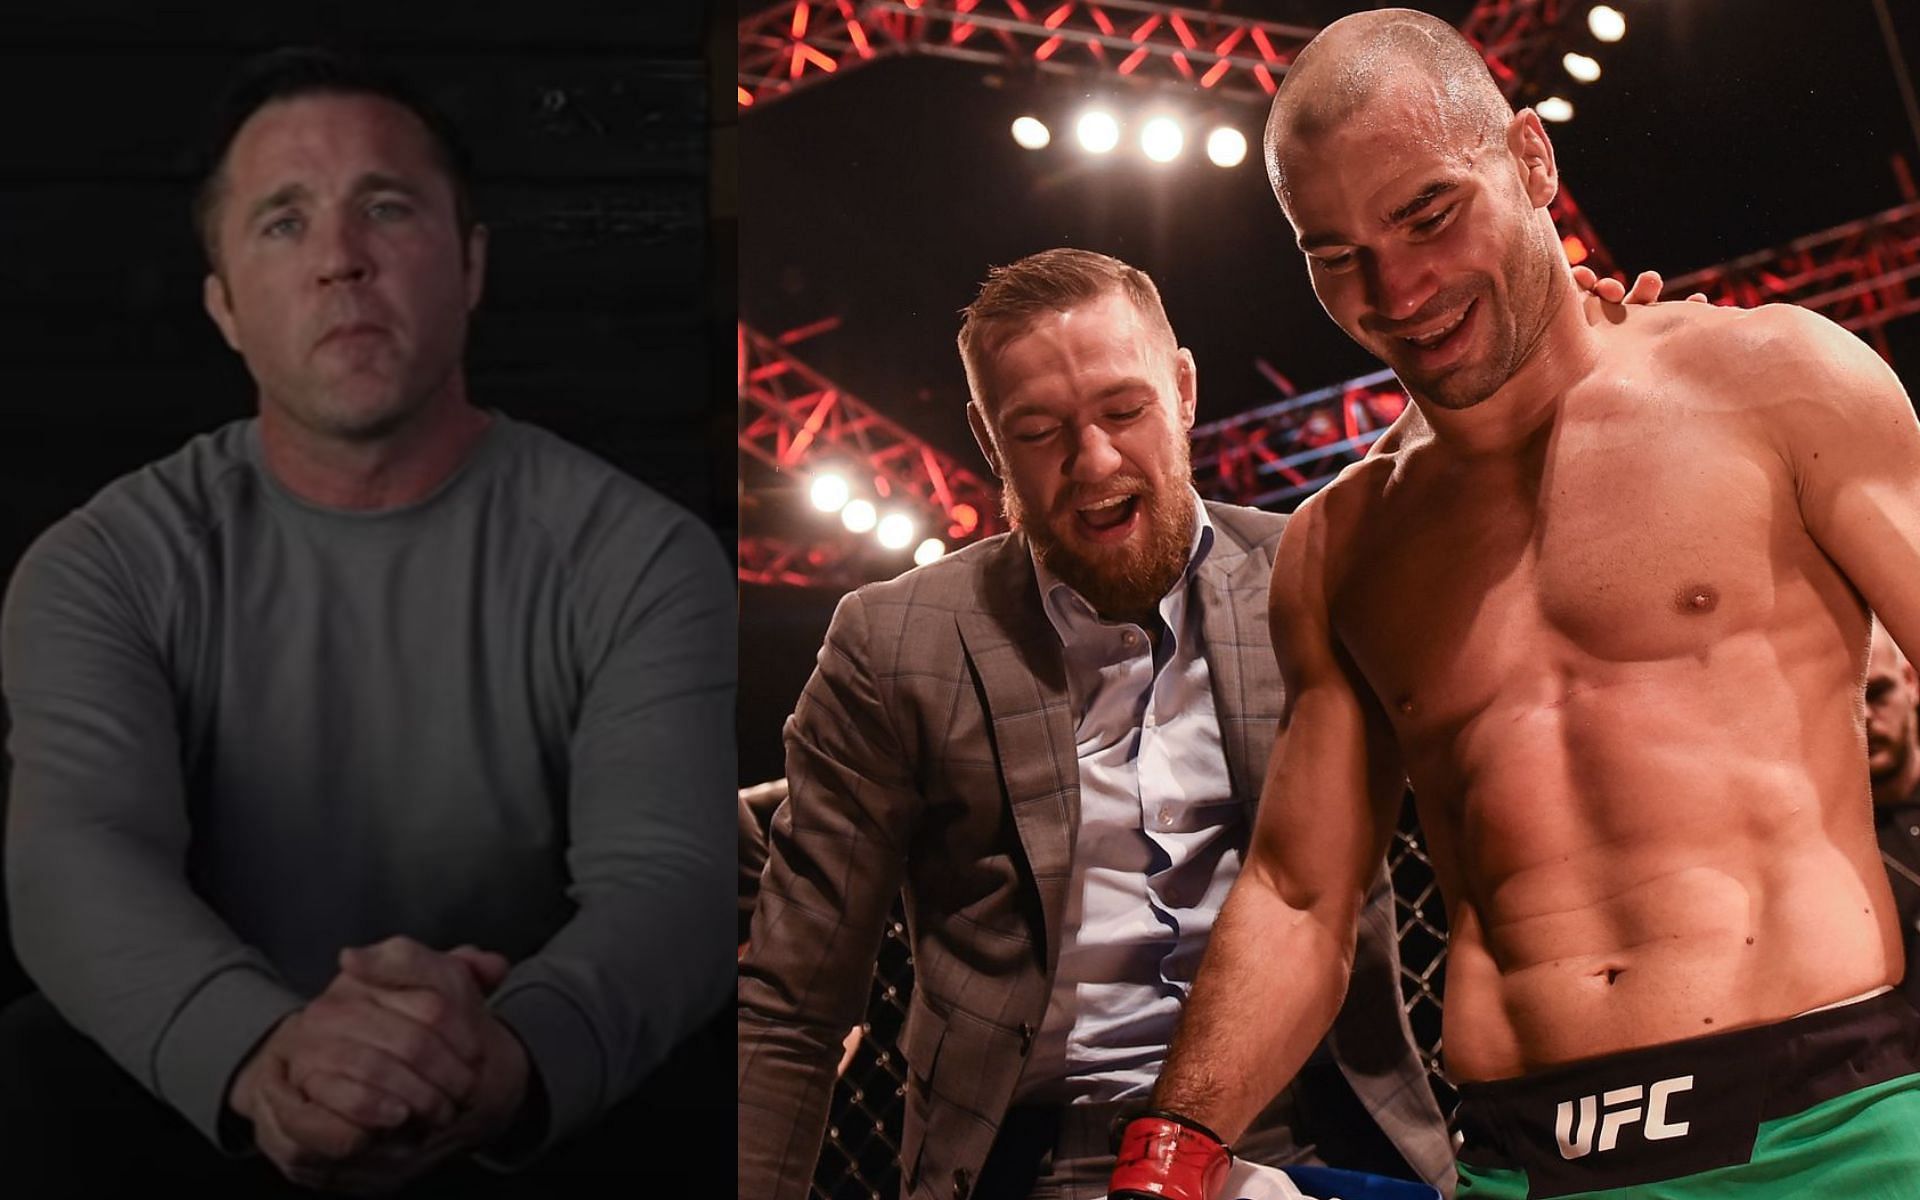 Chael Sonnen (left) and Conor McGregor and Artem Lobov (right). [Images courtesy: left image from YouTube Chael Sonnen and right image from Getty Images]